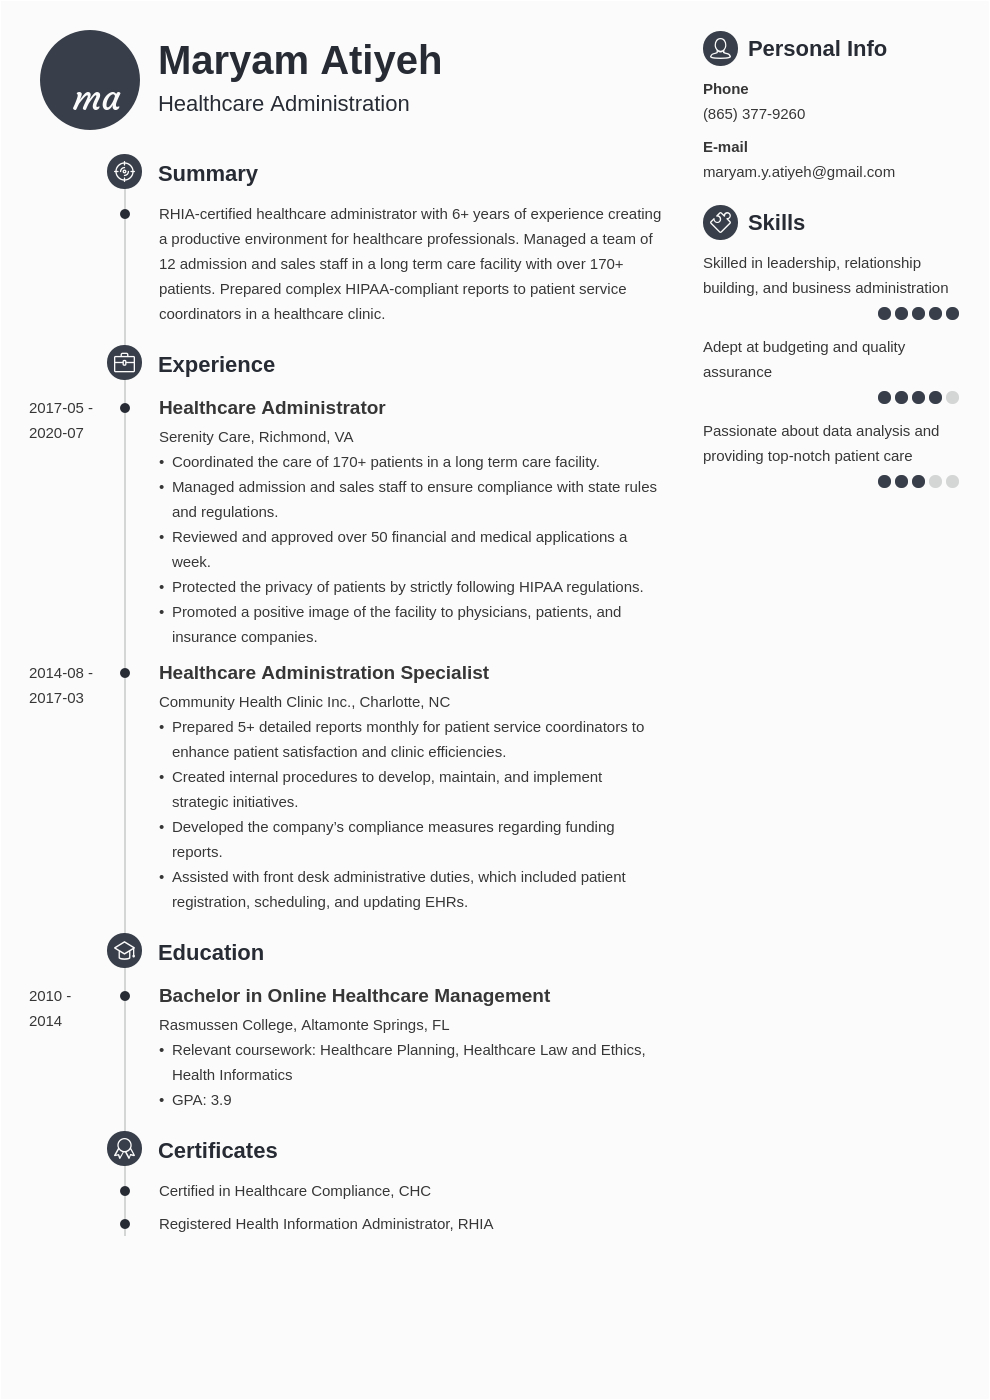 Free Resume Templates for Healthcare Administration Healthcare Administration Resume Samples and Writing Guide